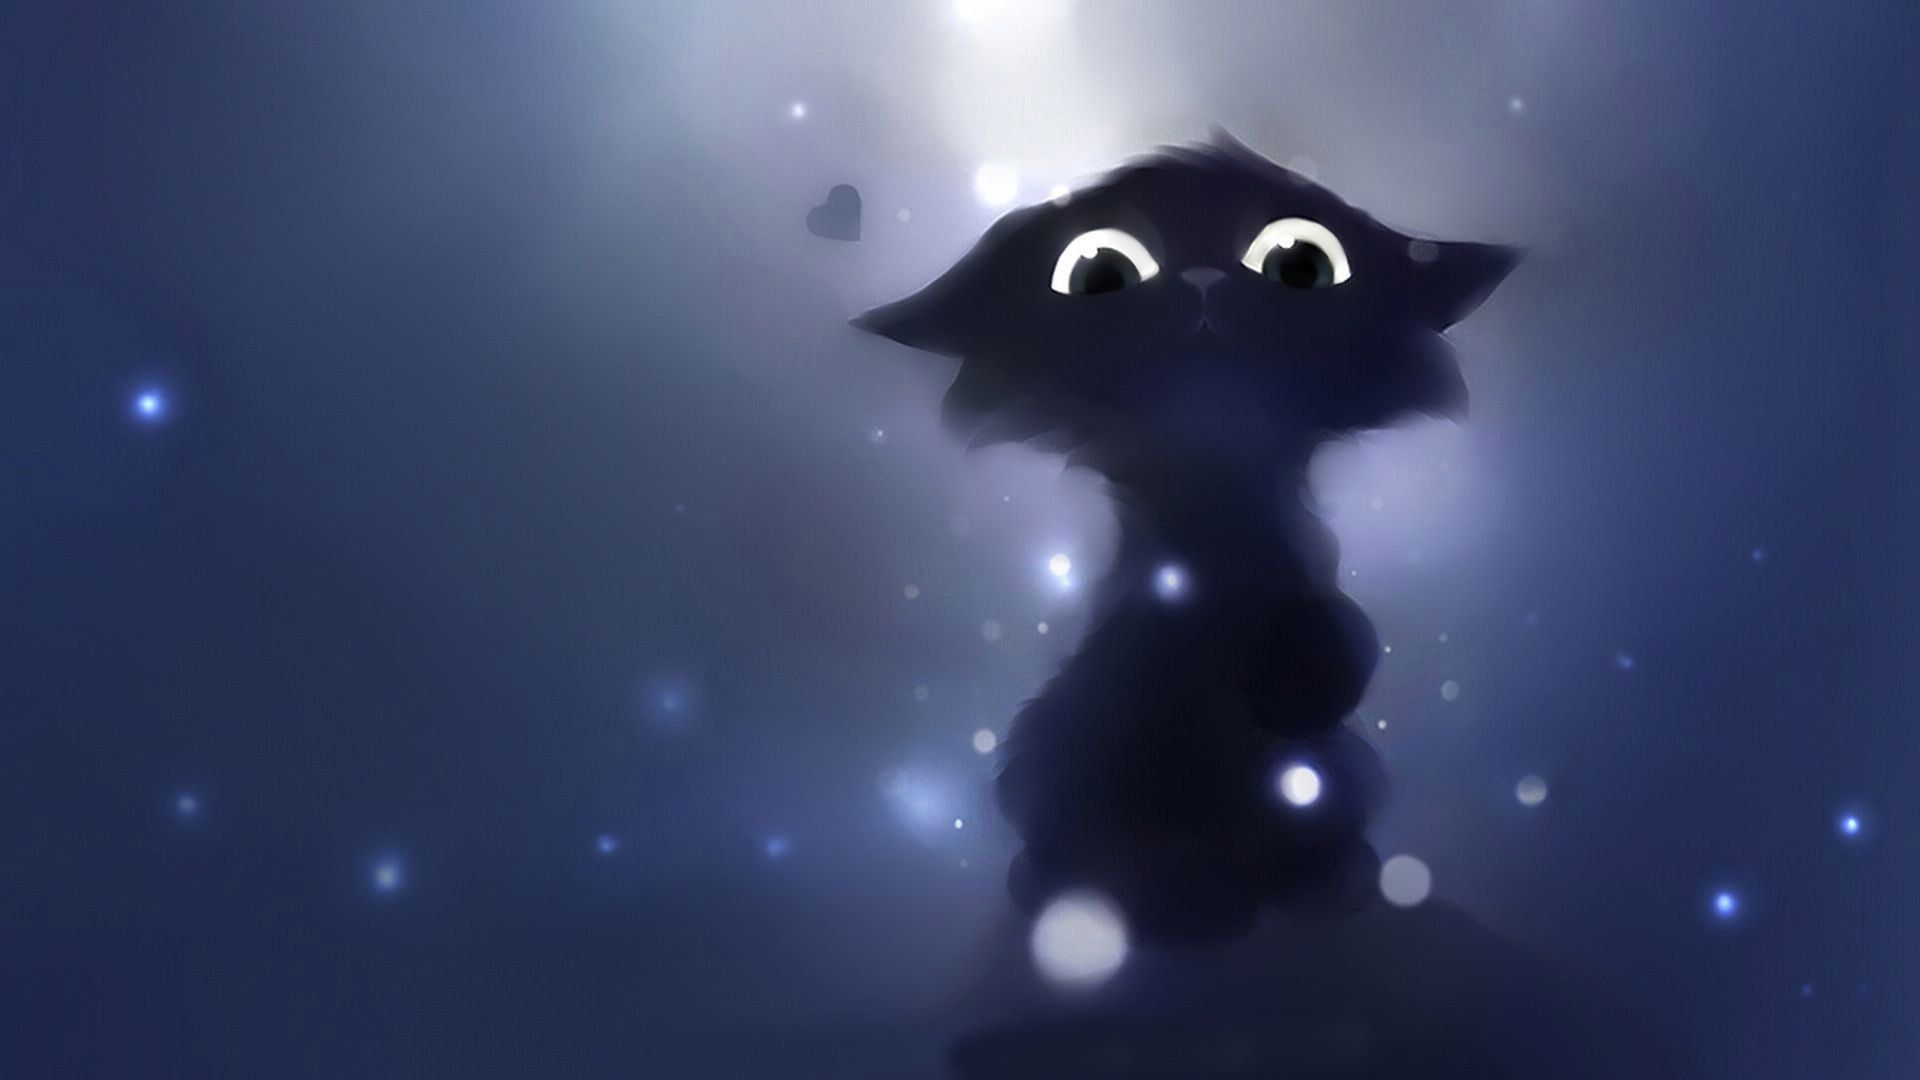 Animated Cats Wallpapers